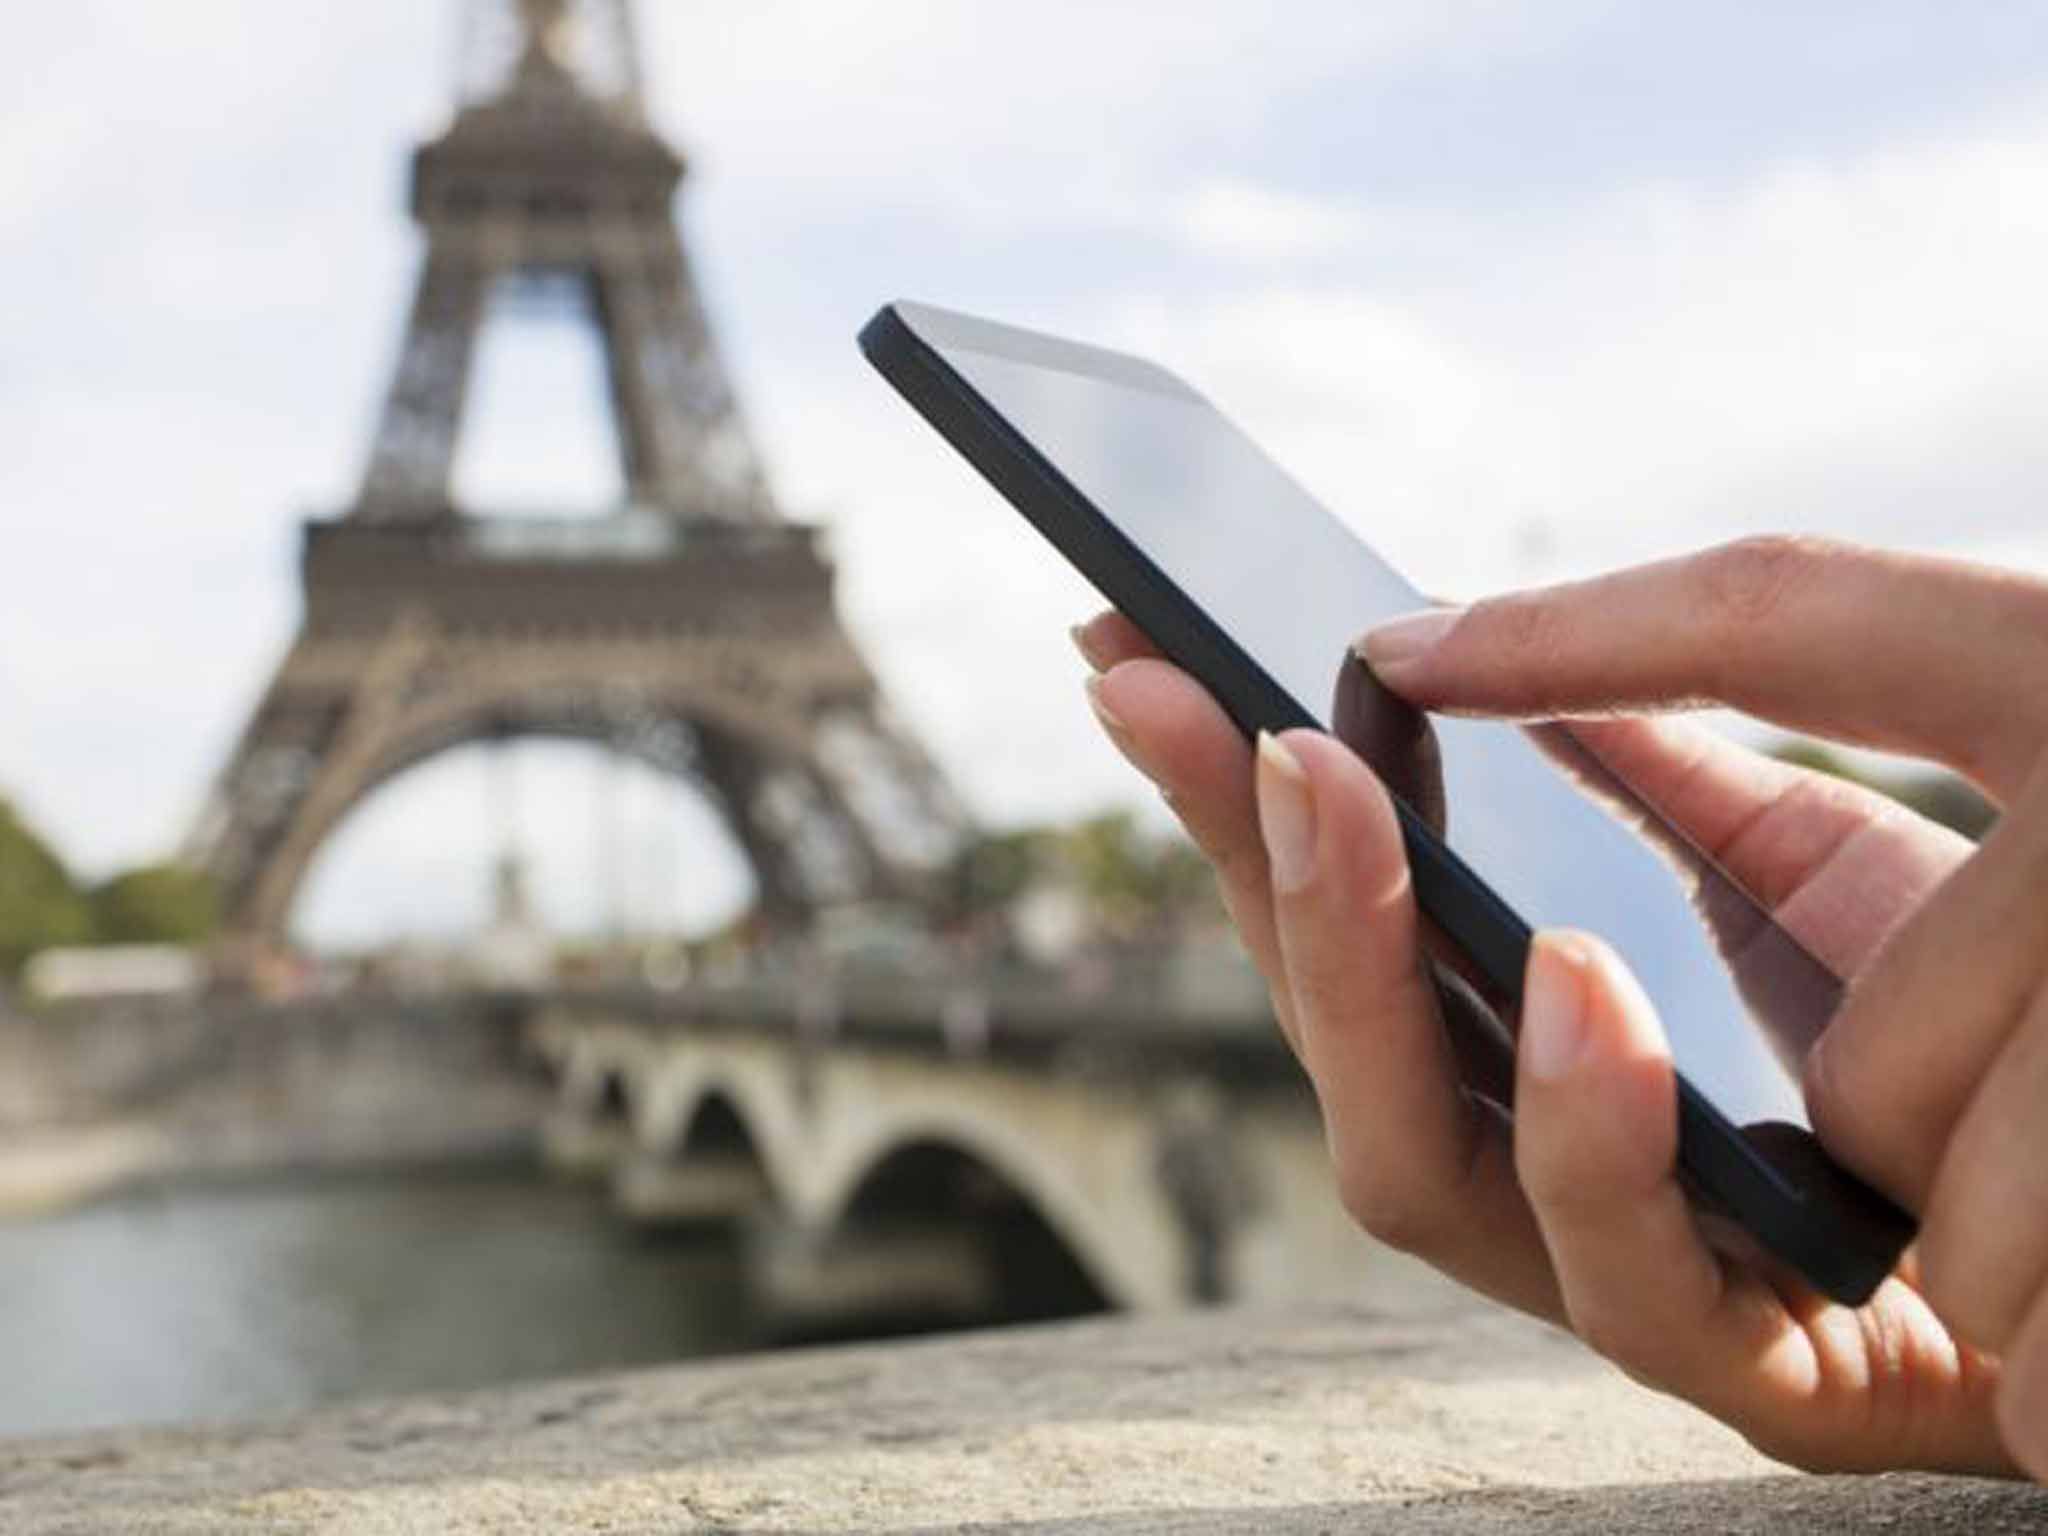 eu roaming charges will end this year standardised wholesale prices to come into effect image 1